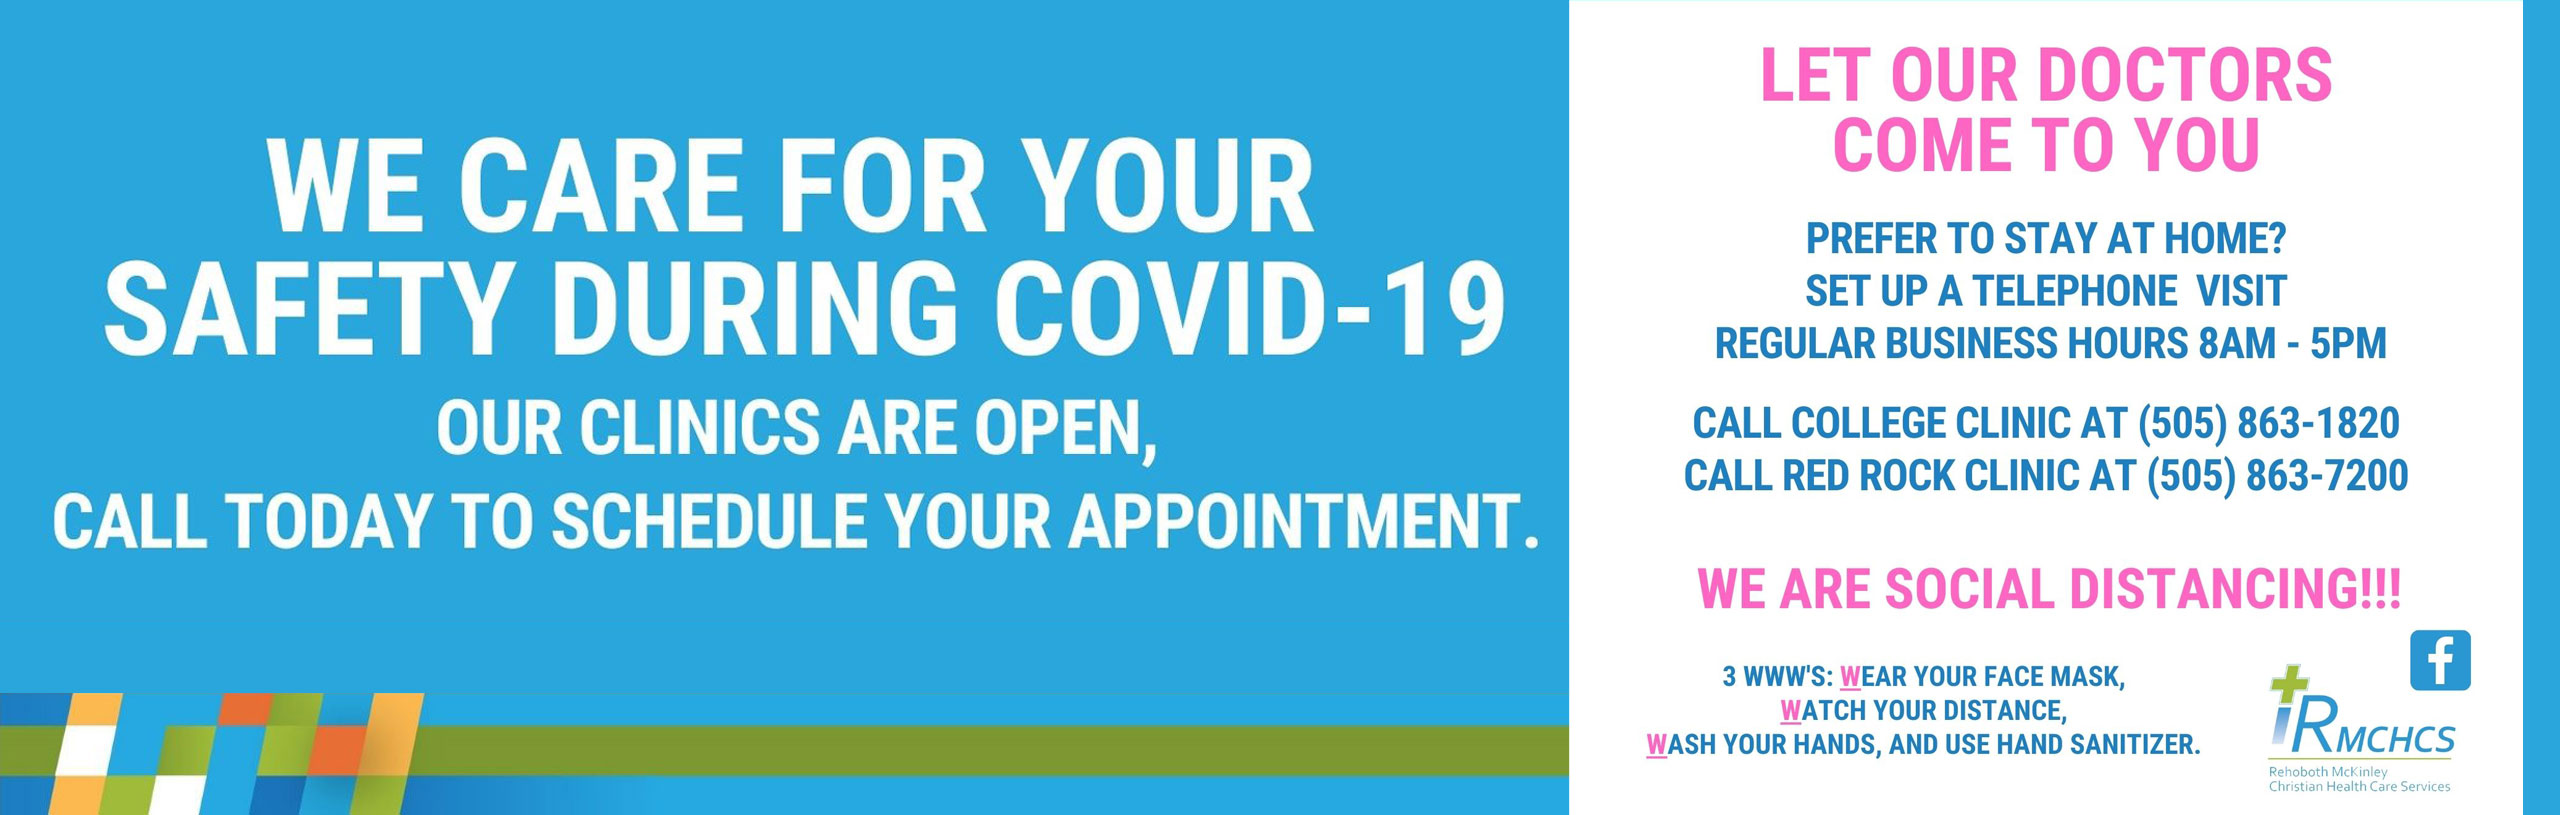 Delivering care safely during covid-19. Let our doctors come to you.